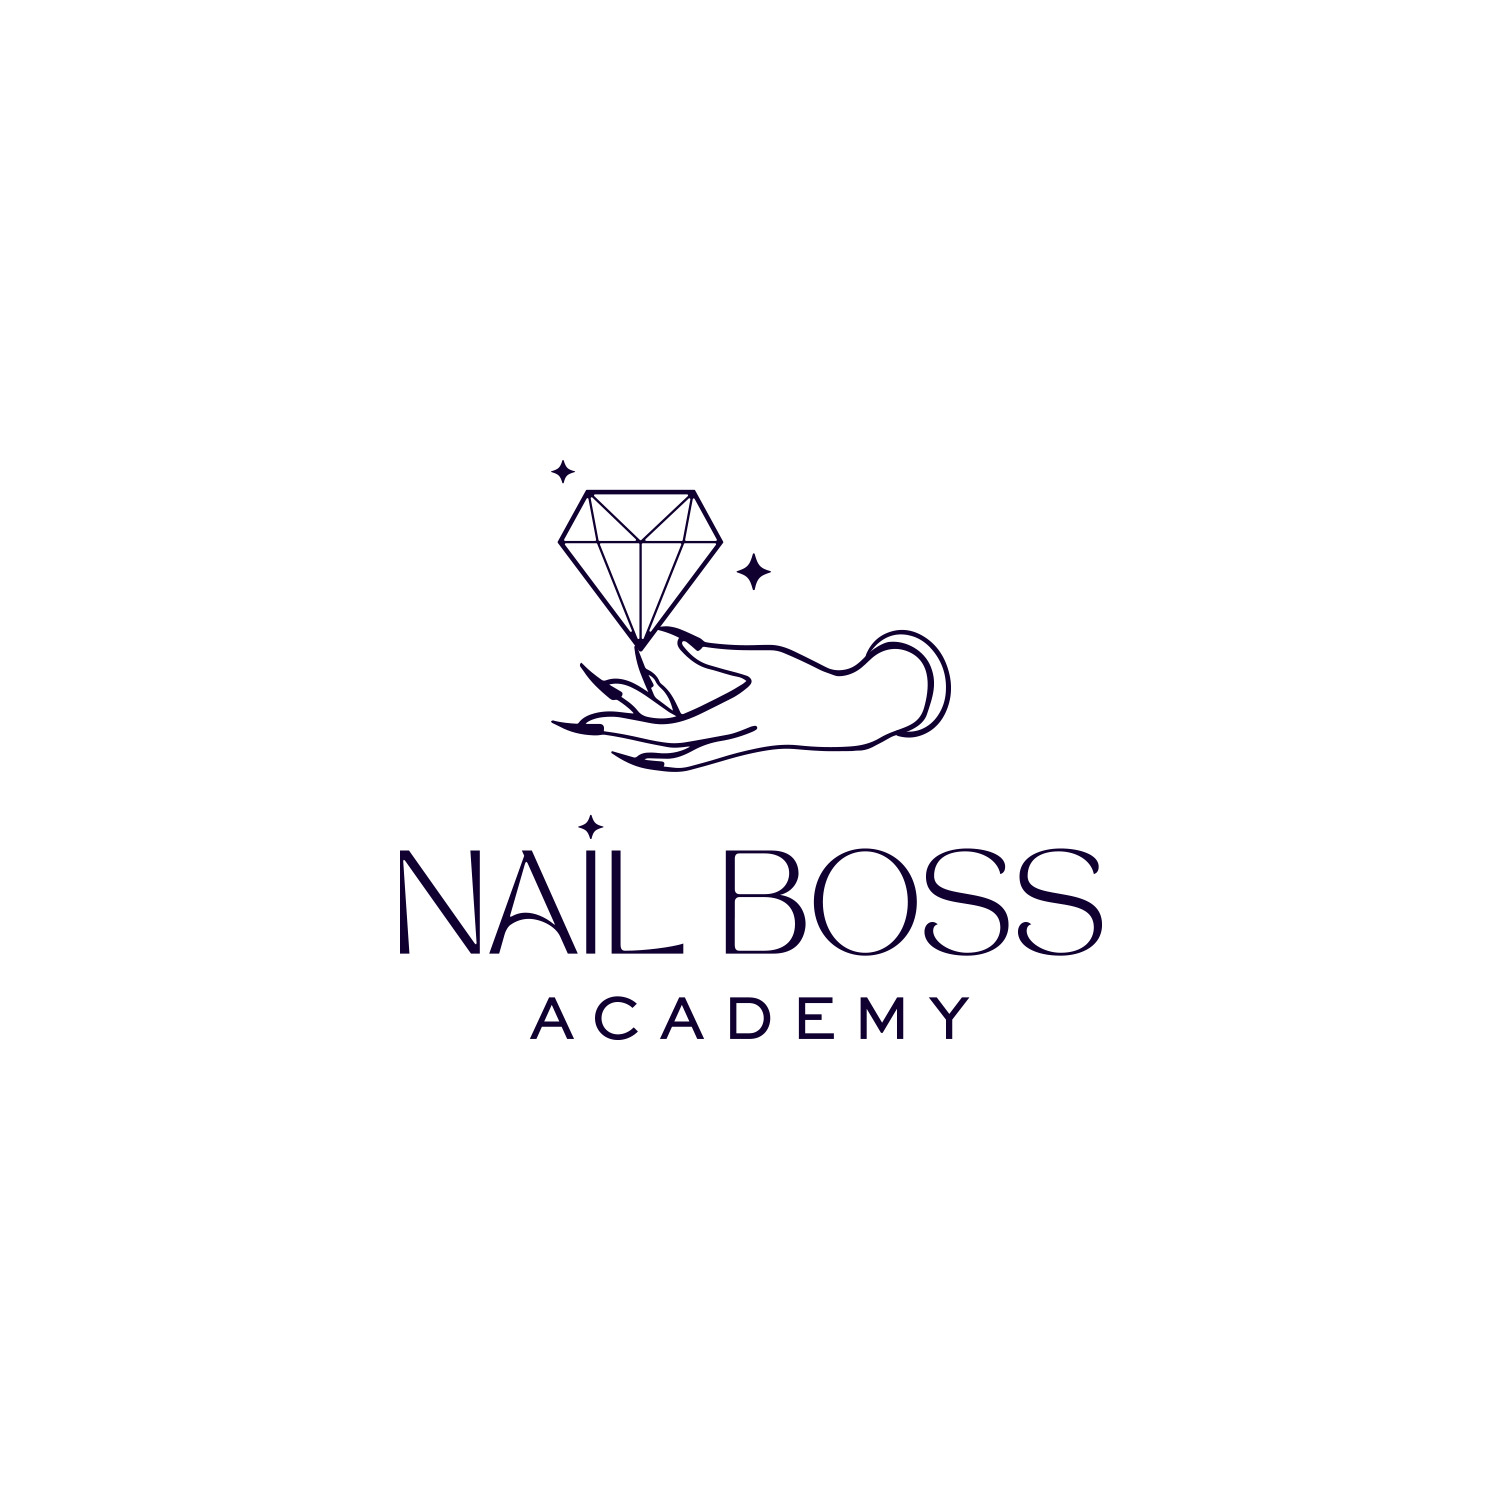 Bling Em Claws and Nail Boss Academy branding by Leysa Flores Design